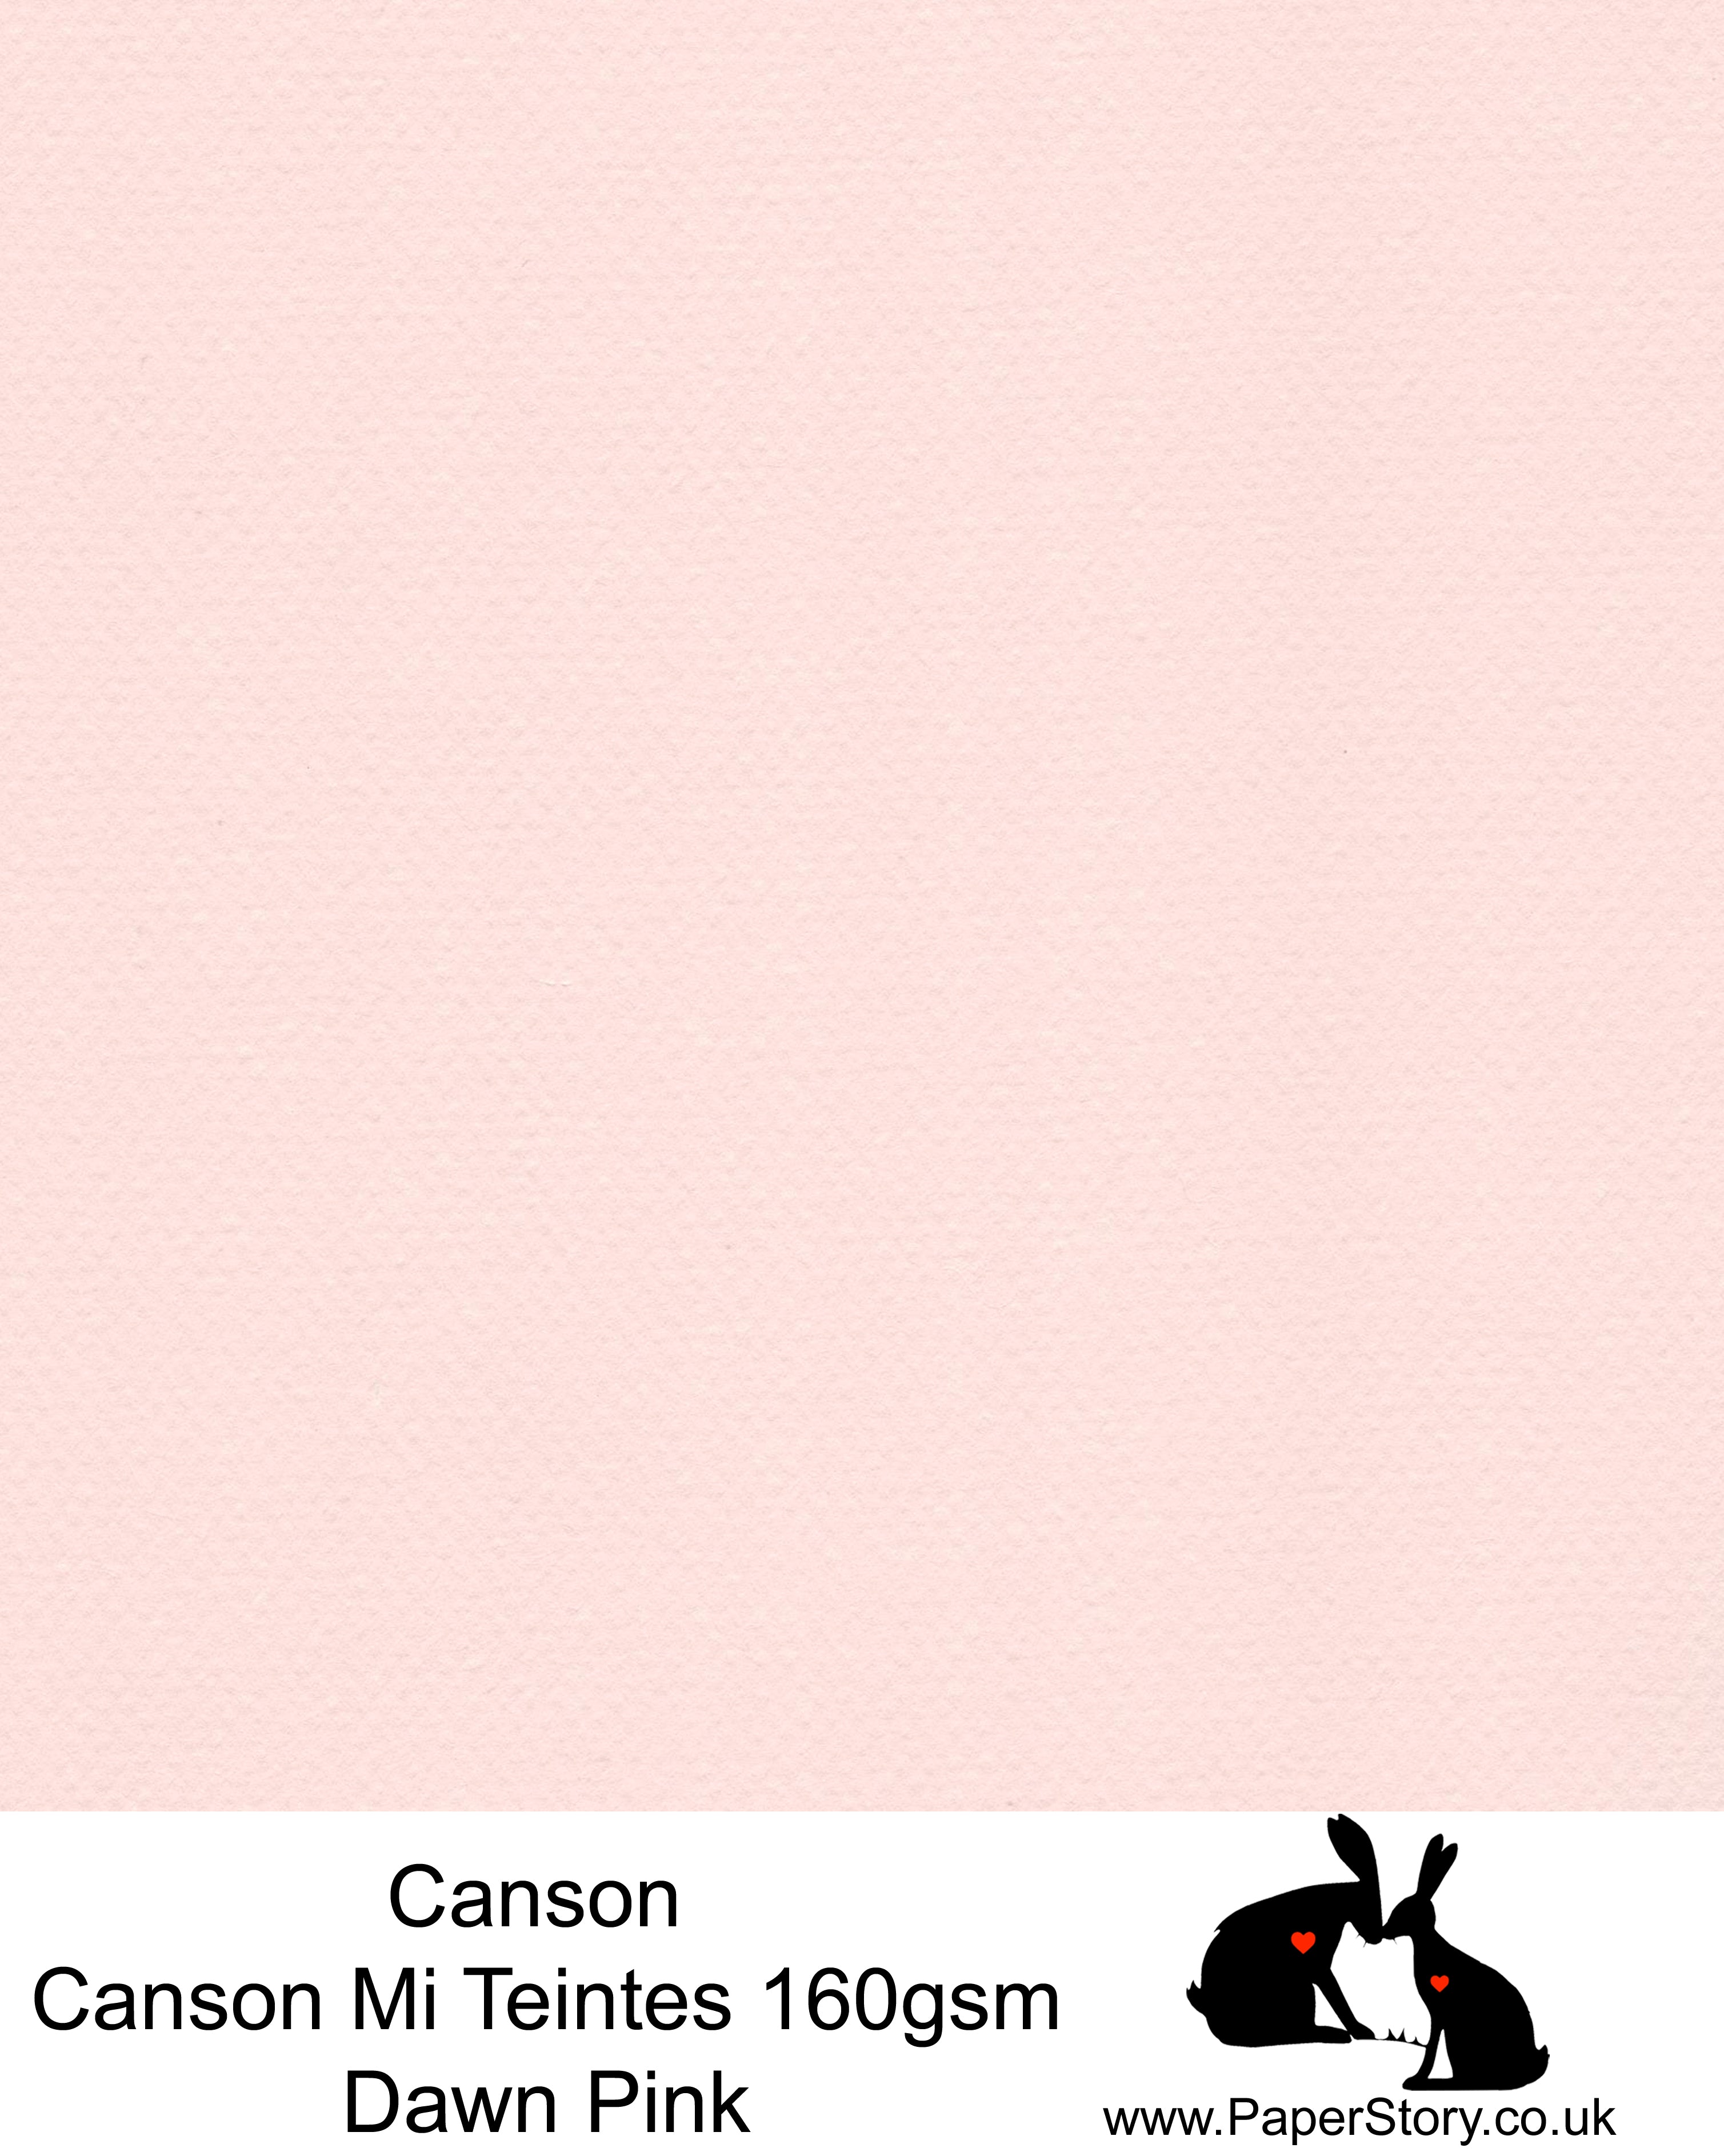 Canson Mi Teintes acid free, soft pink, hammered texture honeycomb surface paper 160 gsm. This is a popular and classic paper for all artists especially well respected for Pastel  and Papercutting made famous by Paper Panda. This paper has a honeycombed finish one side and fine grain the other. An authentic art paper, acid free with a  very high 50% cotton content. Canson Mi-Teintes complies with the ISO 9706 standard on permanence, a guarantee of excellent conservation  